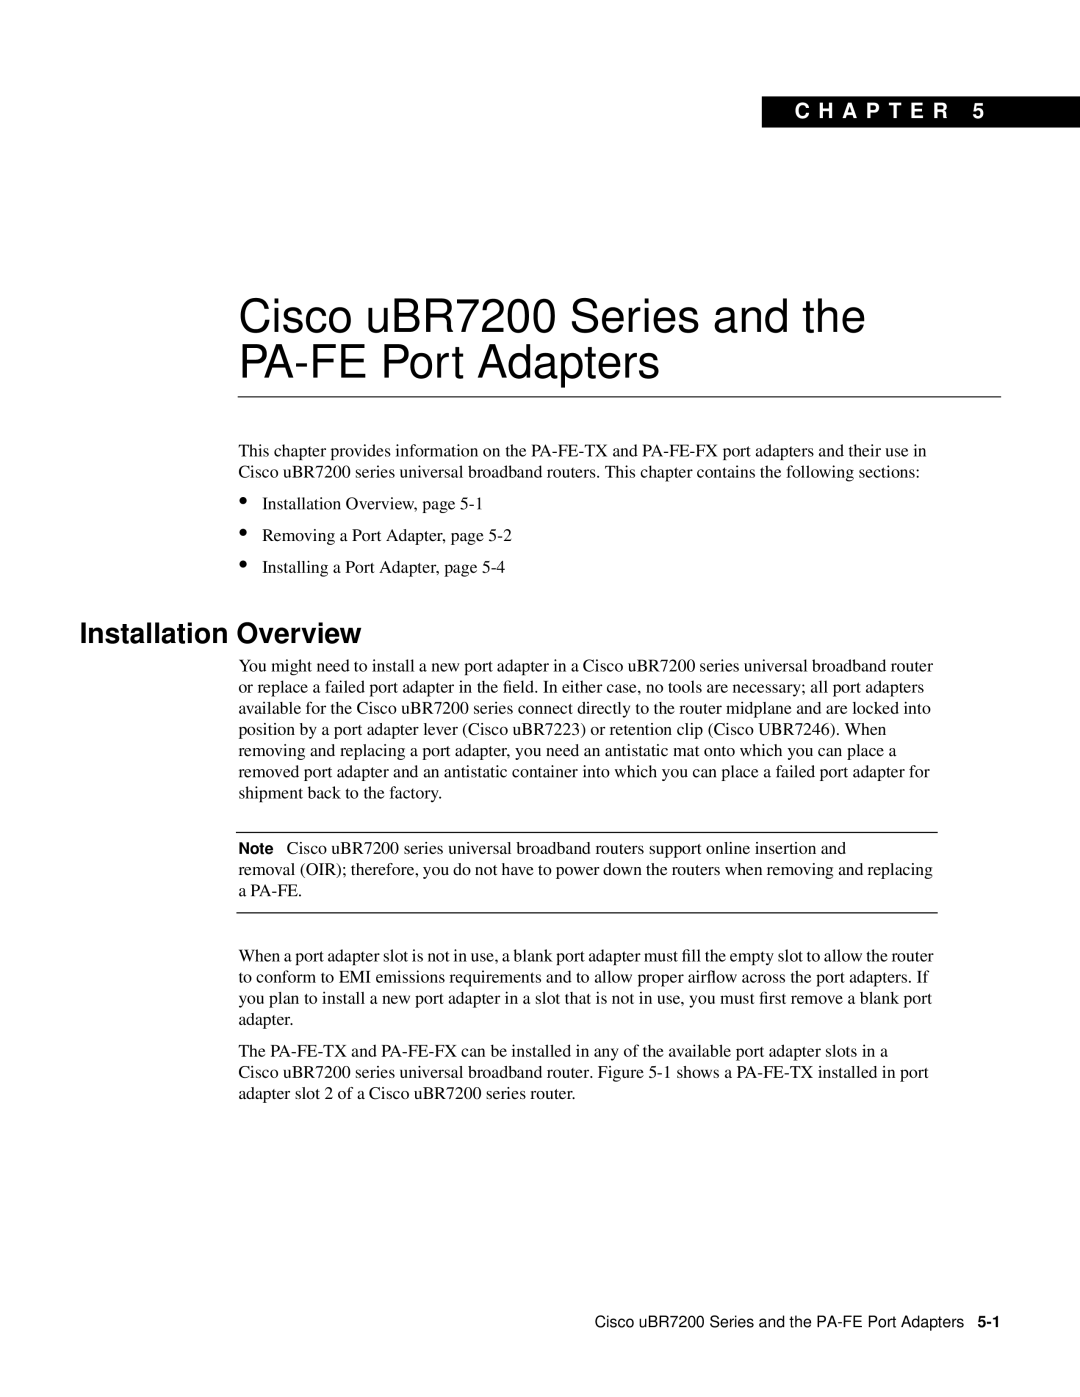 Cisco Systems PA-FE-FX, PA-FE-TX Cisco uBR7200 Series and the PA-FE Port Adapters, Installation Overview, C H A P T E R 